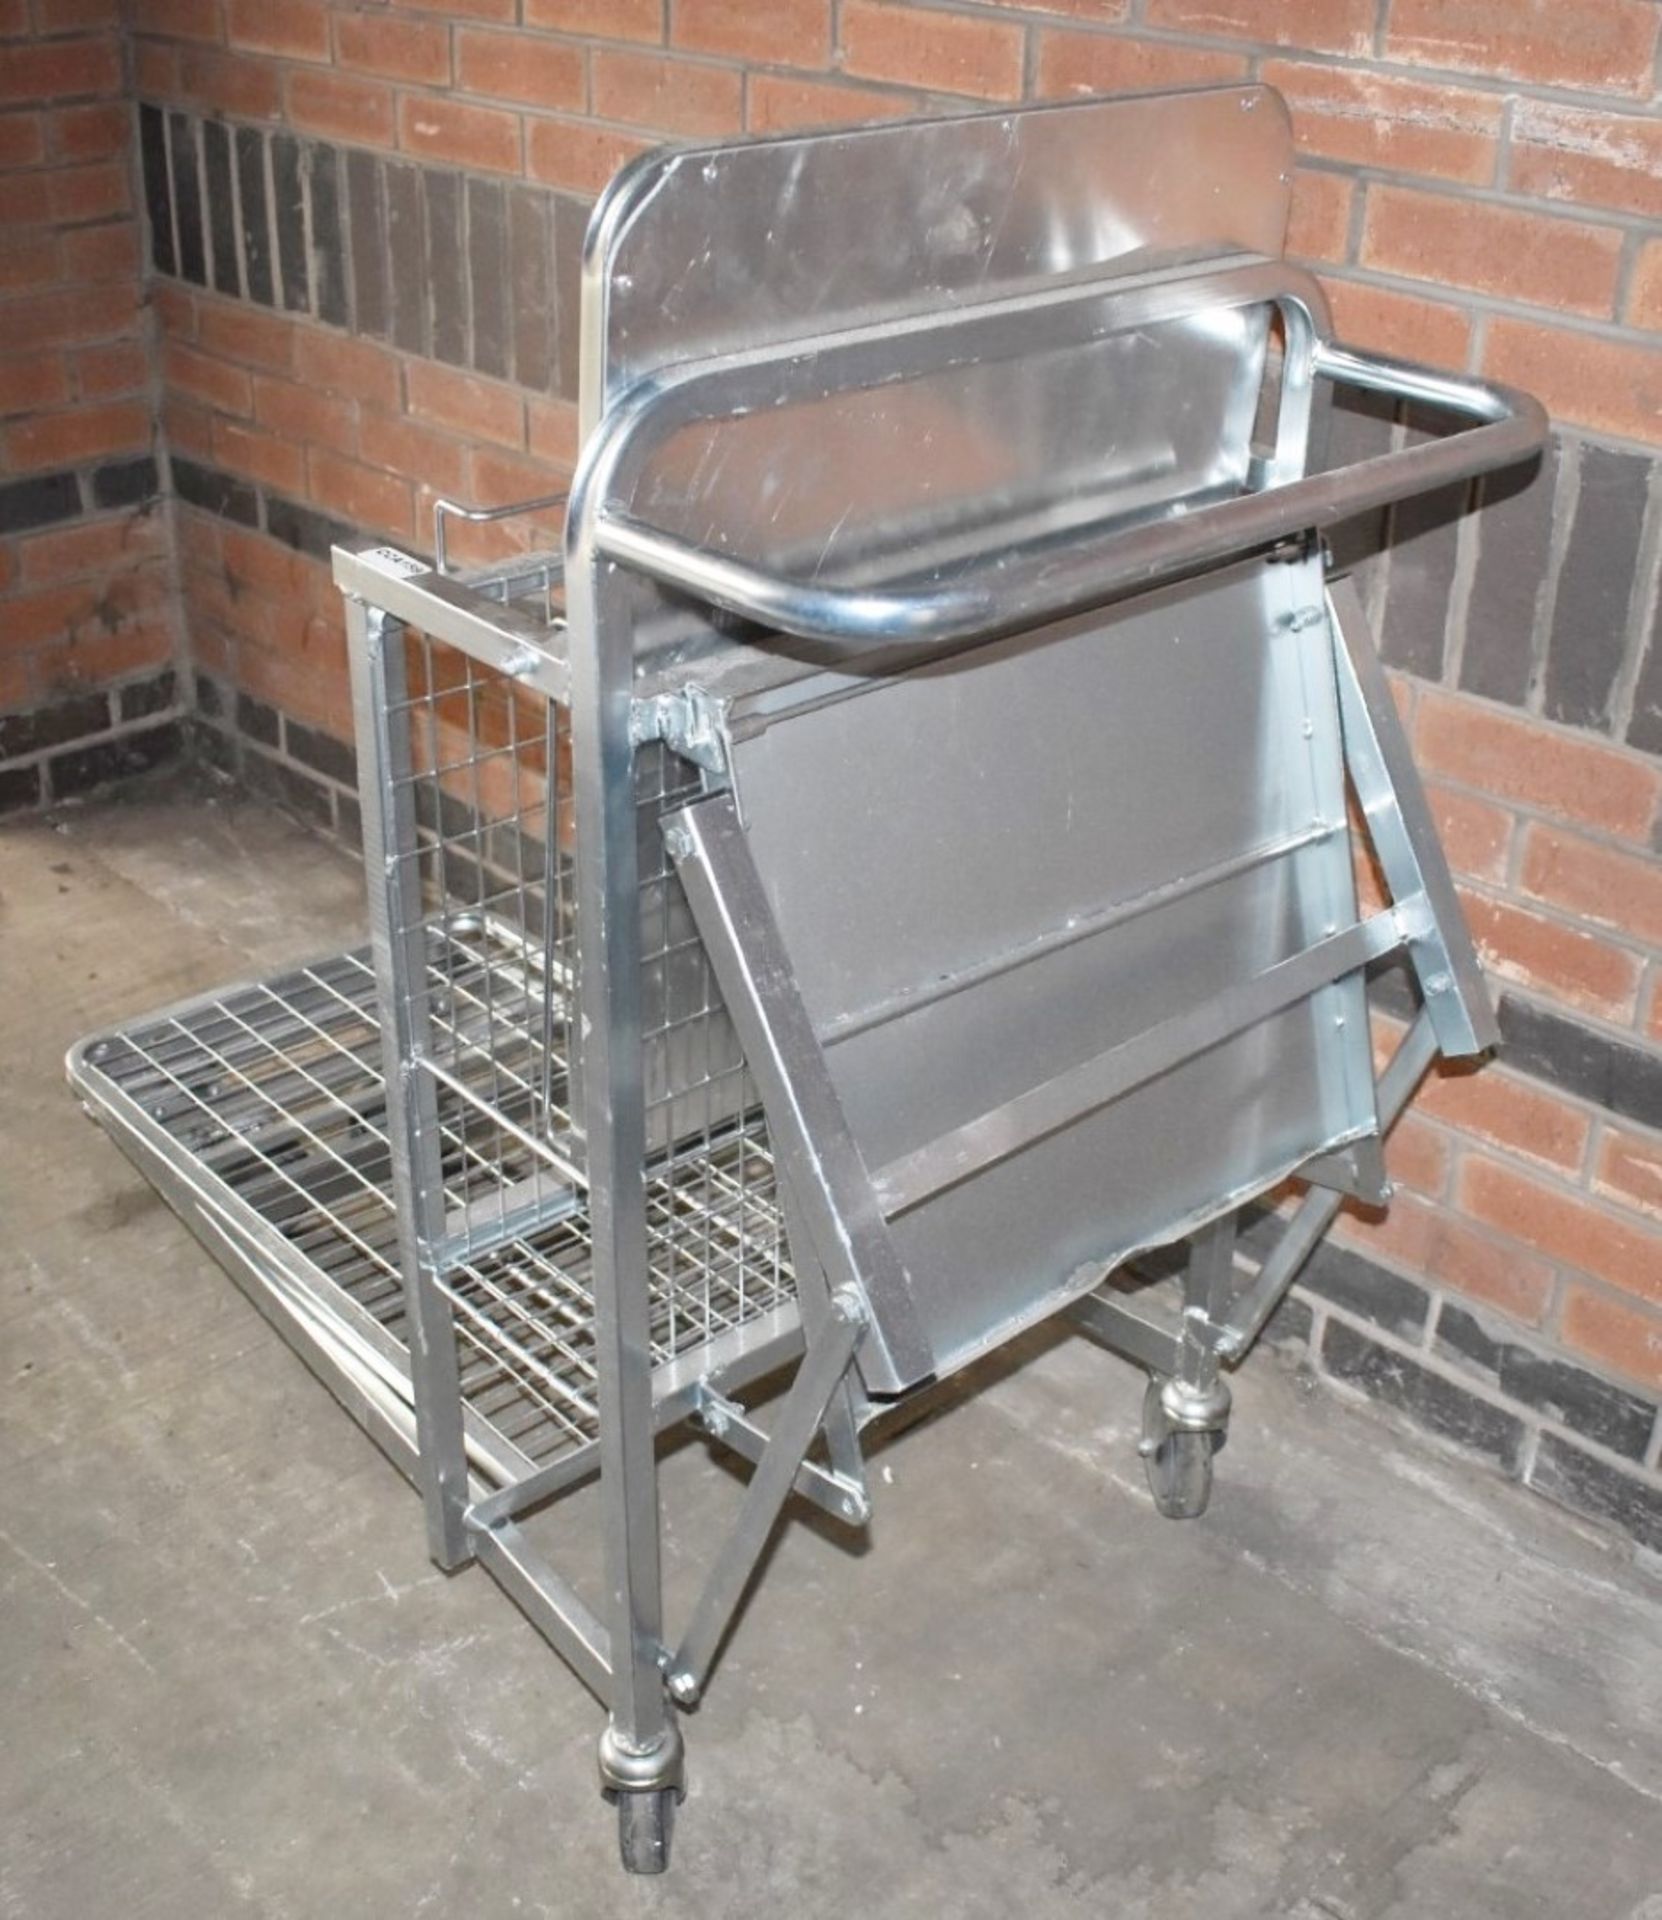 1 x Supermarket Retail Merchandising Trolley With Pull Out Step and Folding Shelf - CL595 - Ref: CCA - Image 4 of 12